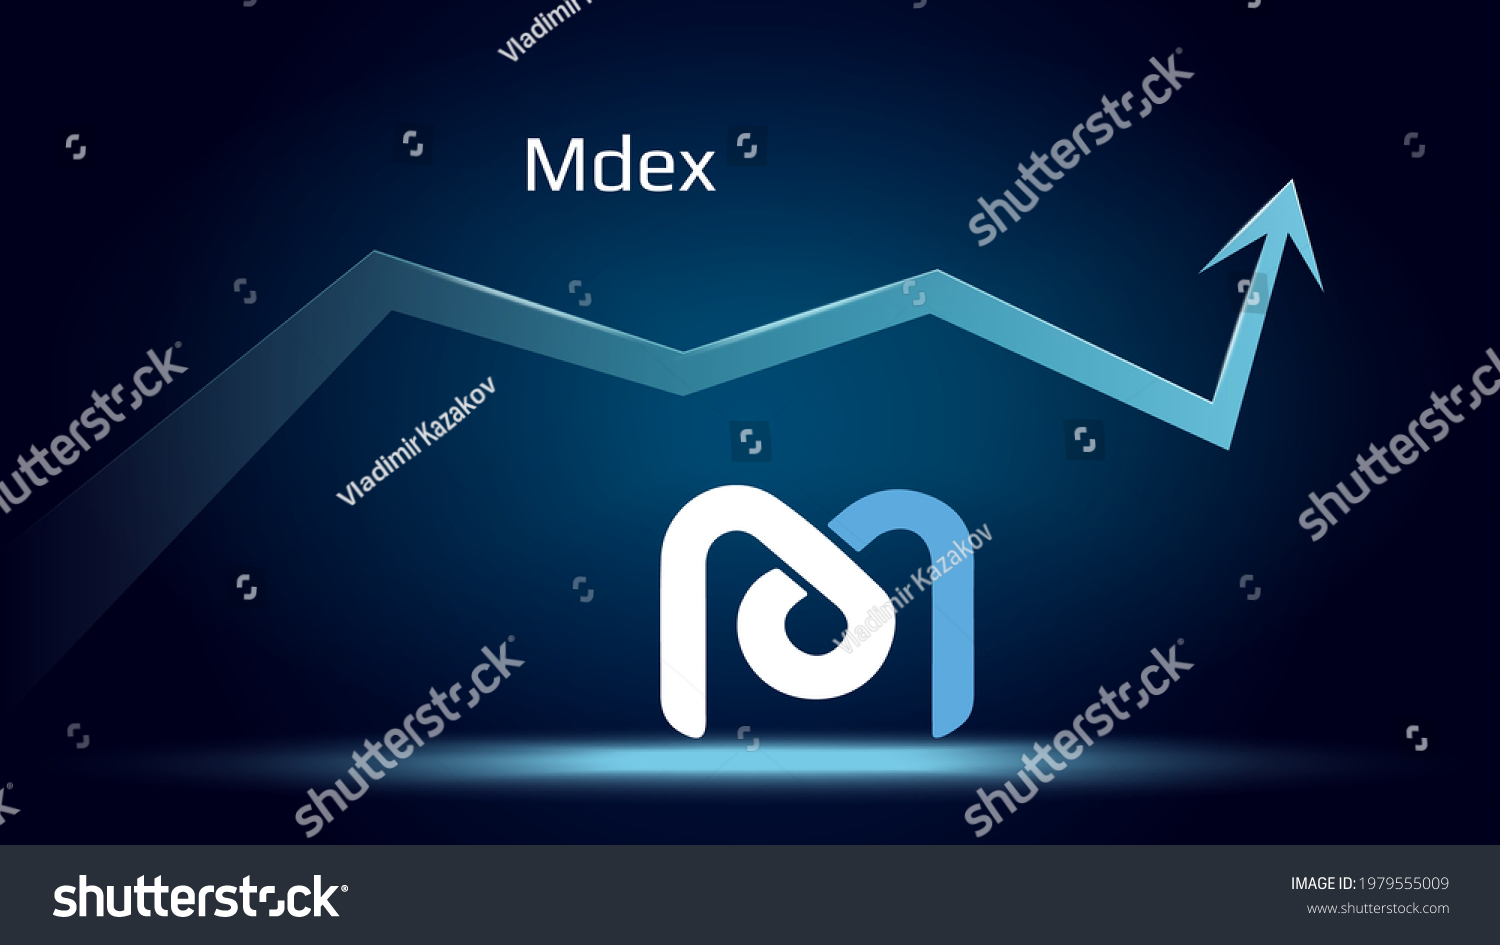 SVG of Mdex MDX in uptrend and price is rising. Cryptocurrency coin symbol and up arrow. Uniswap flies to the moon. Vector illustration. svg